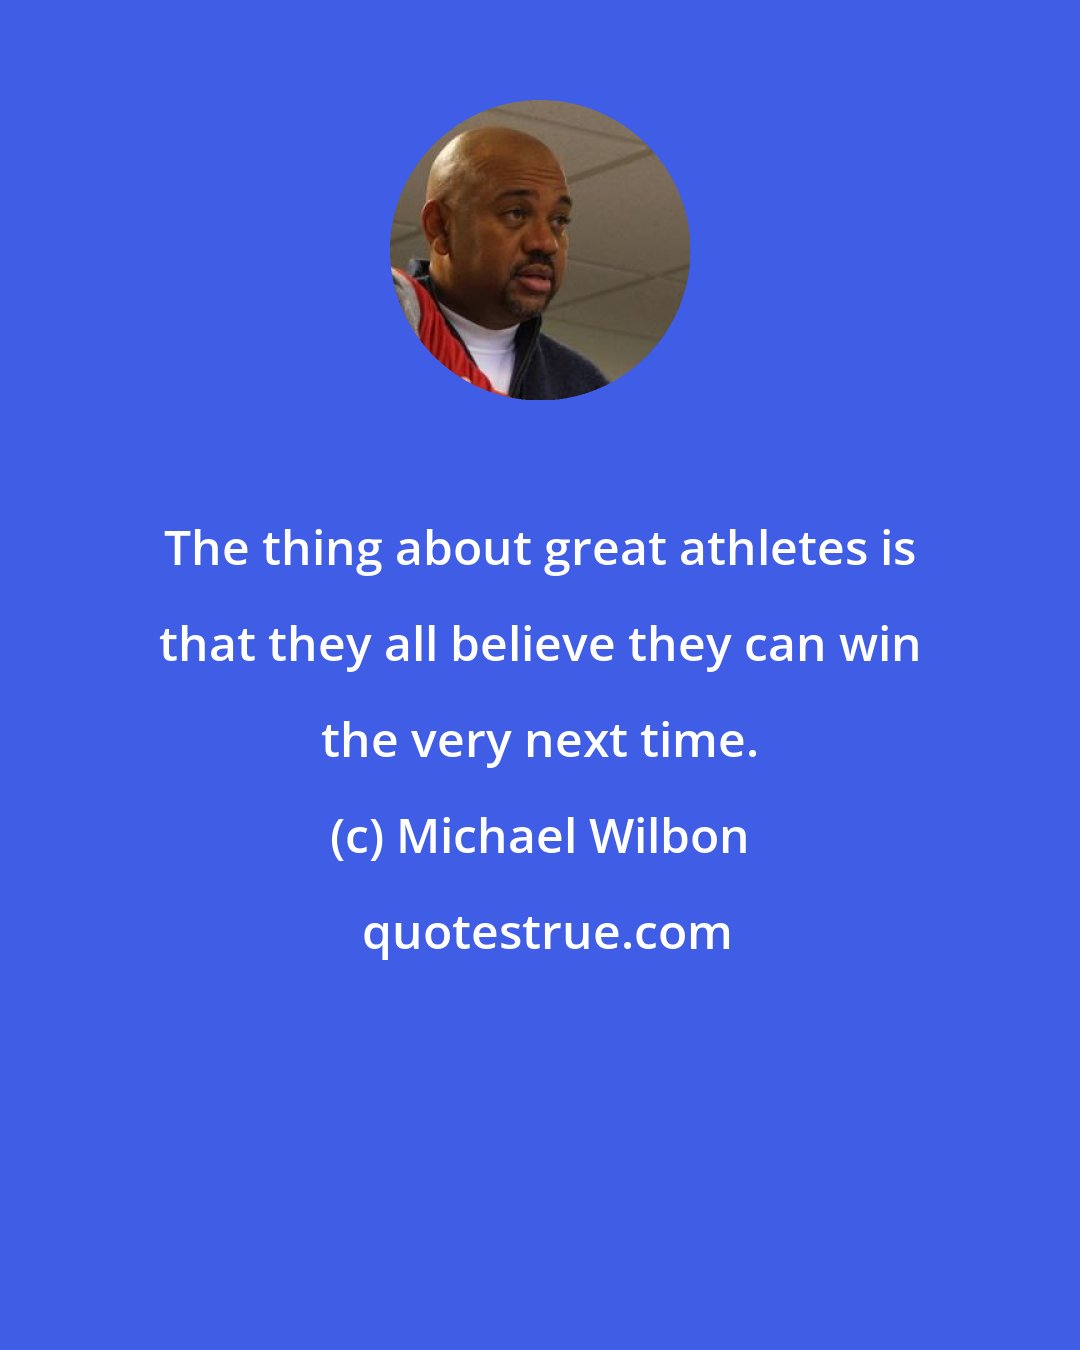 Michael Wilbon: The thing about great athletes is that they all believe they can win the very next time.